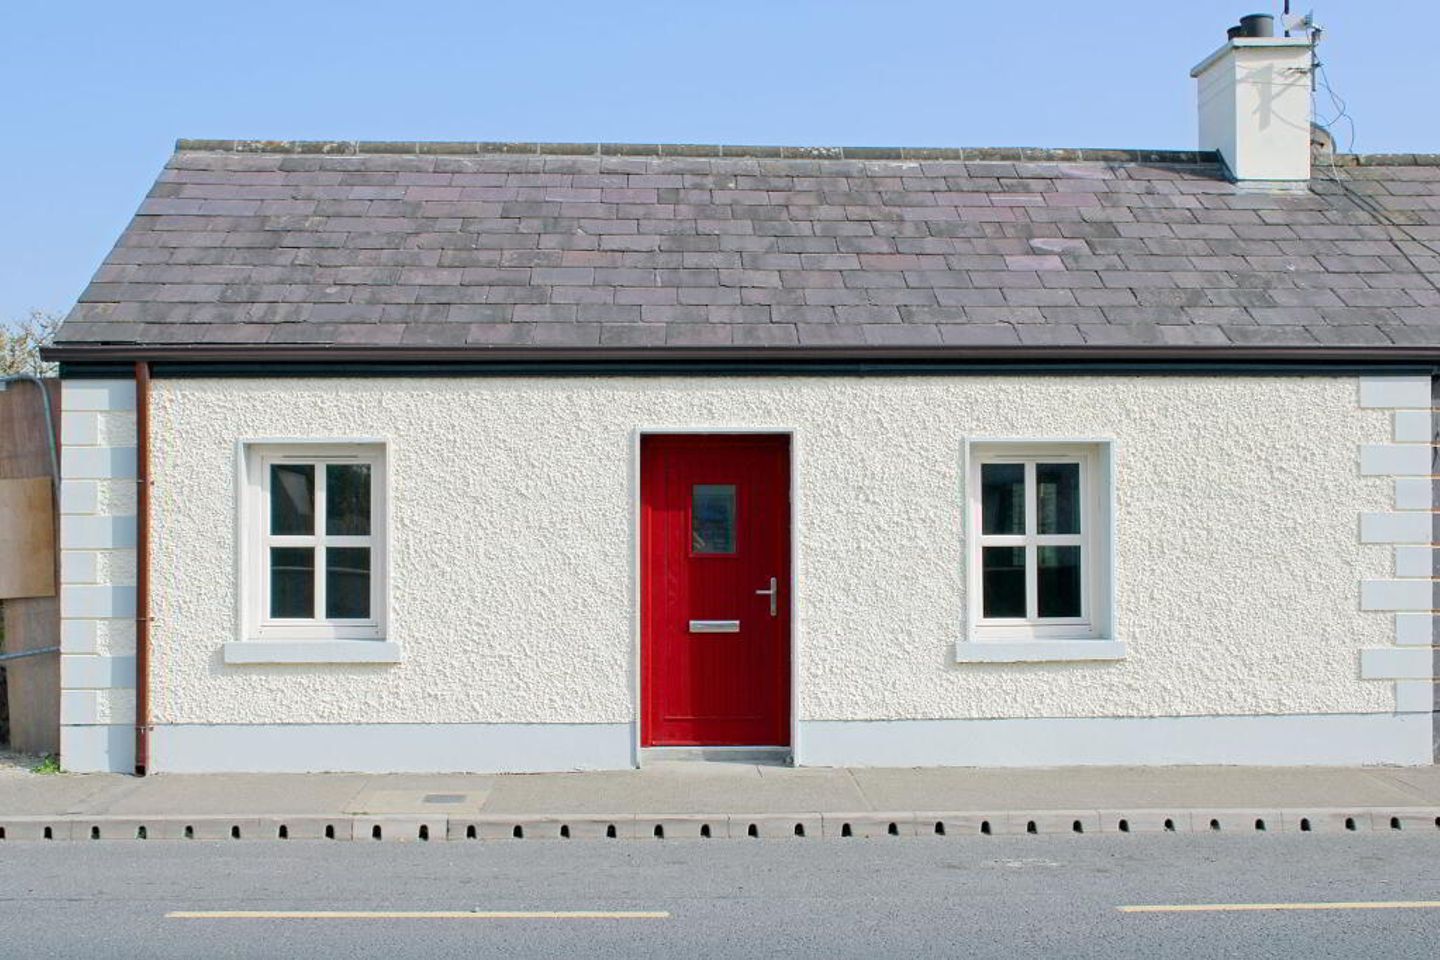 10b Castletown Road, Dundalk, Co. Louth, A91DPX9